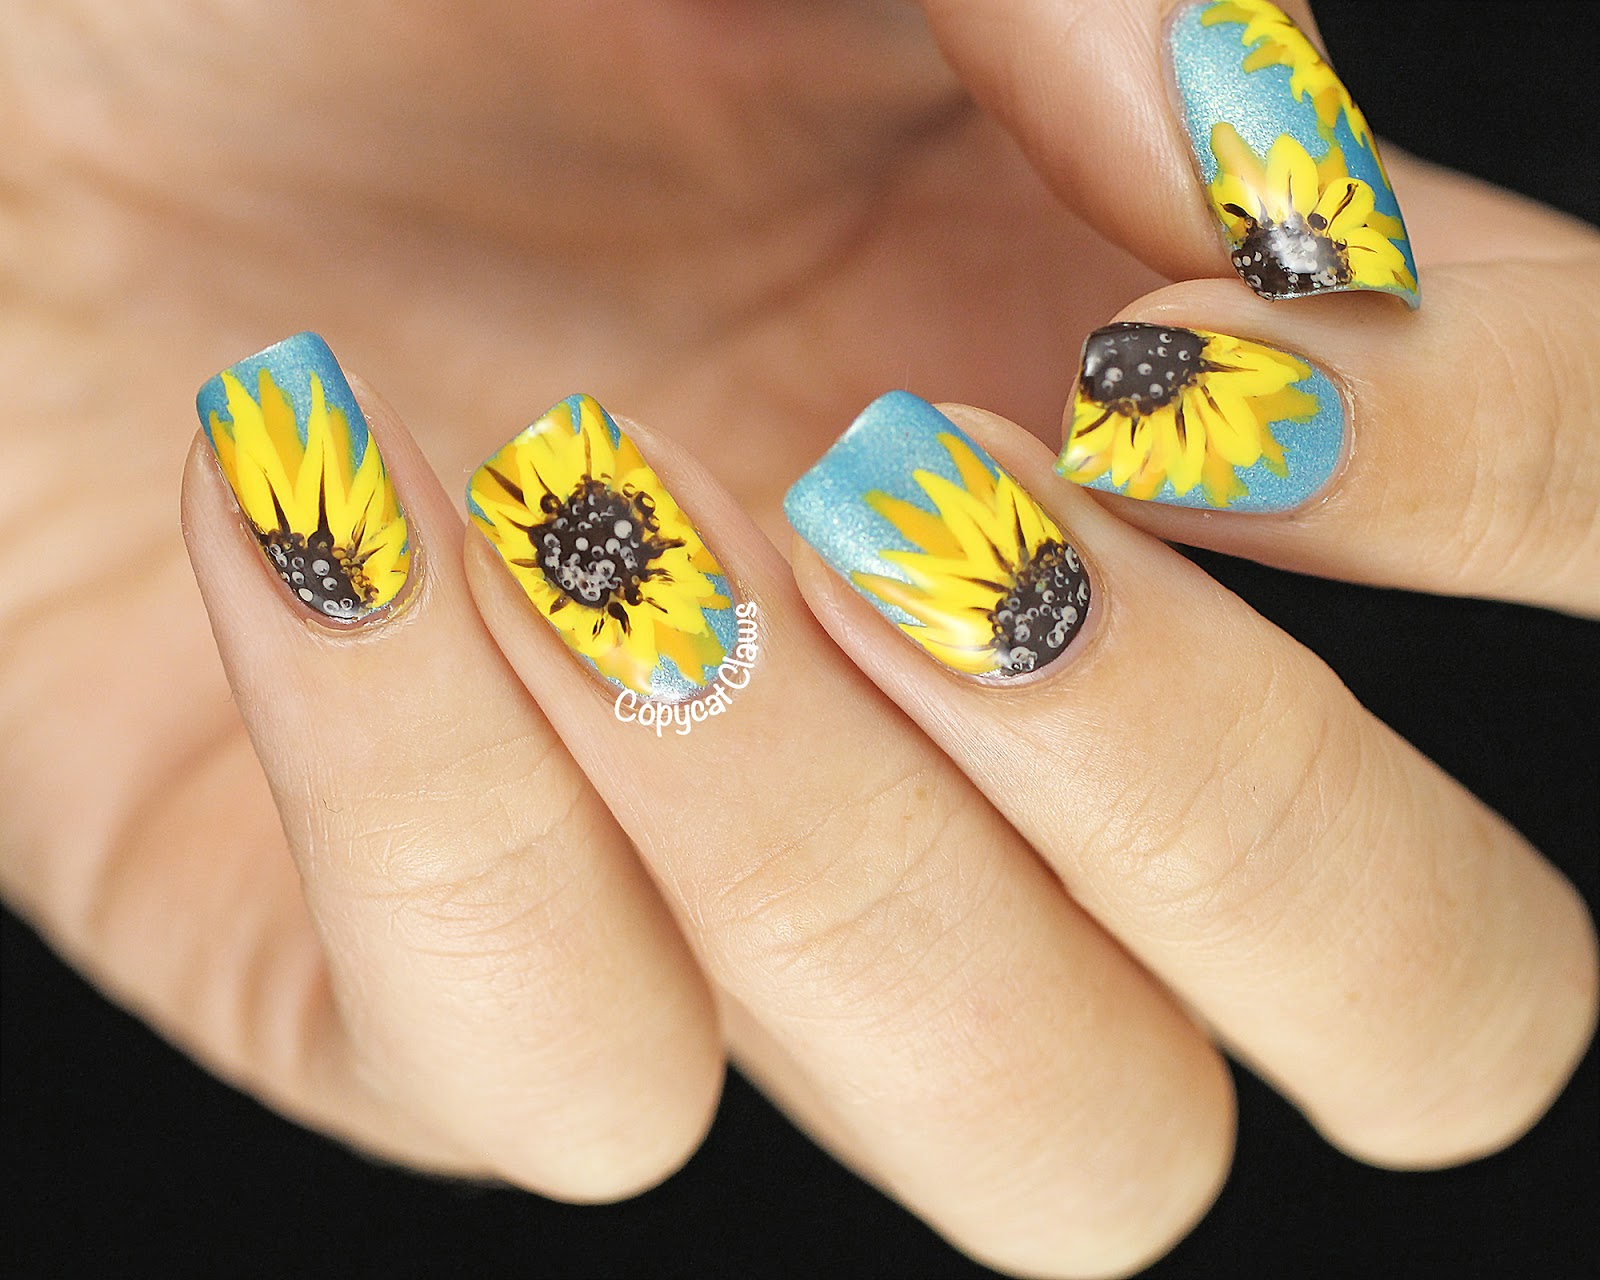 1. Sunflower Nail Art Designs for a Bright and Sunny Look - wide 5